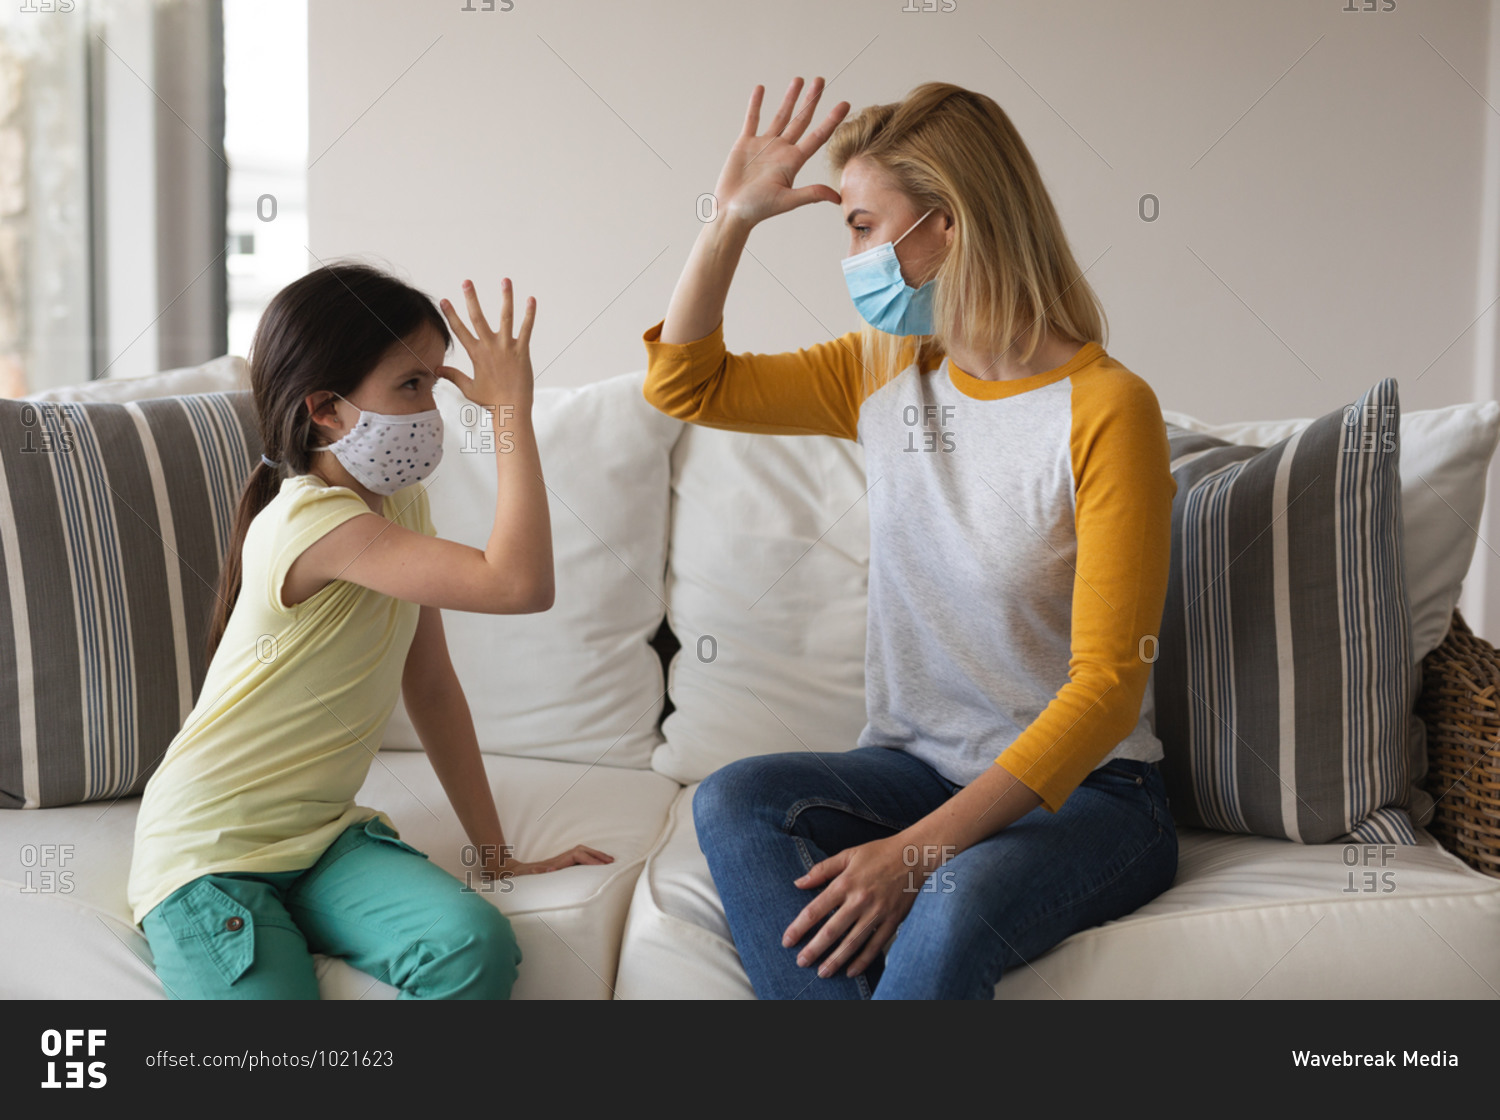 Caucasian woman and her daughter spending time at home together, wearing face masks, having a conversation using sign language. Social distancing during Covid 19 Coronavirus quarantine lockdown.